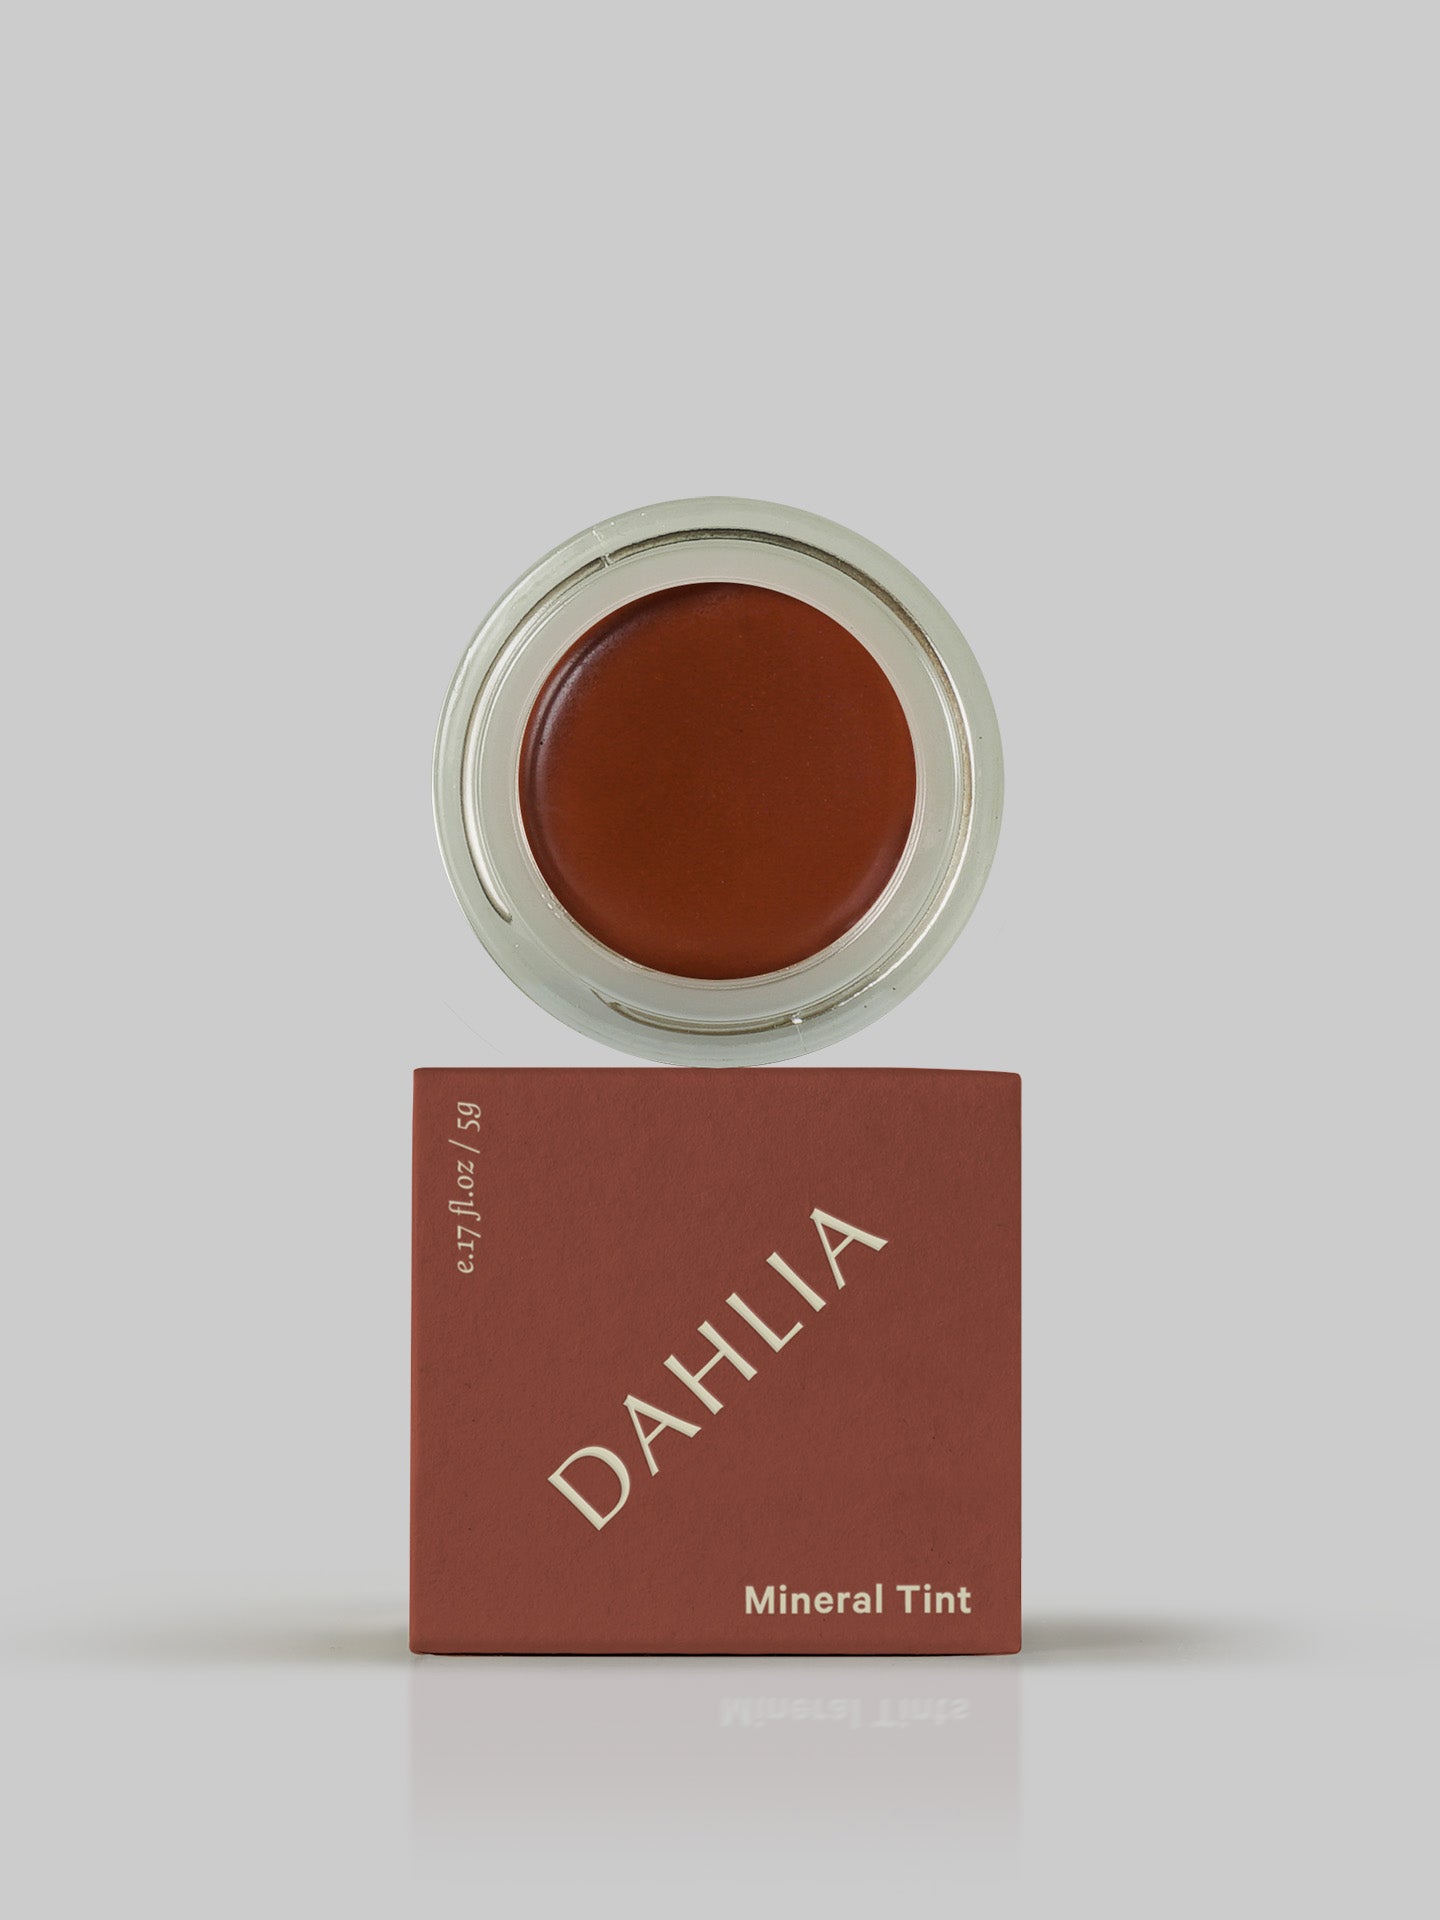 MARYSE's Dahlia mineral tint in a box on a grey background.